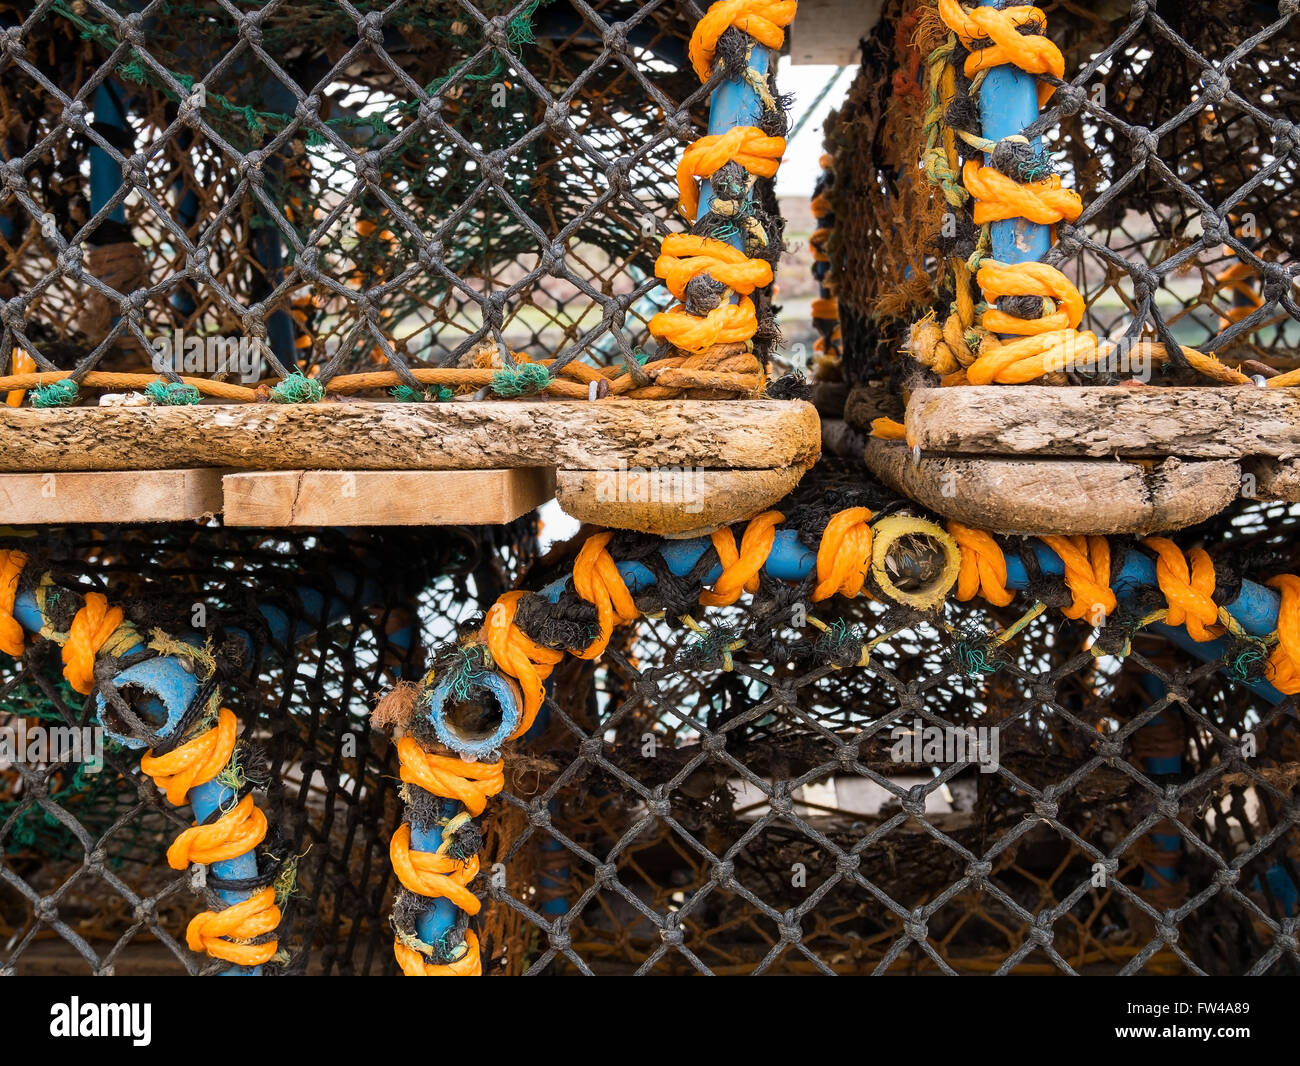 Details of stacked lobster and crab pots (creels) at a harbour in Scotland. Stock Photo